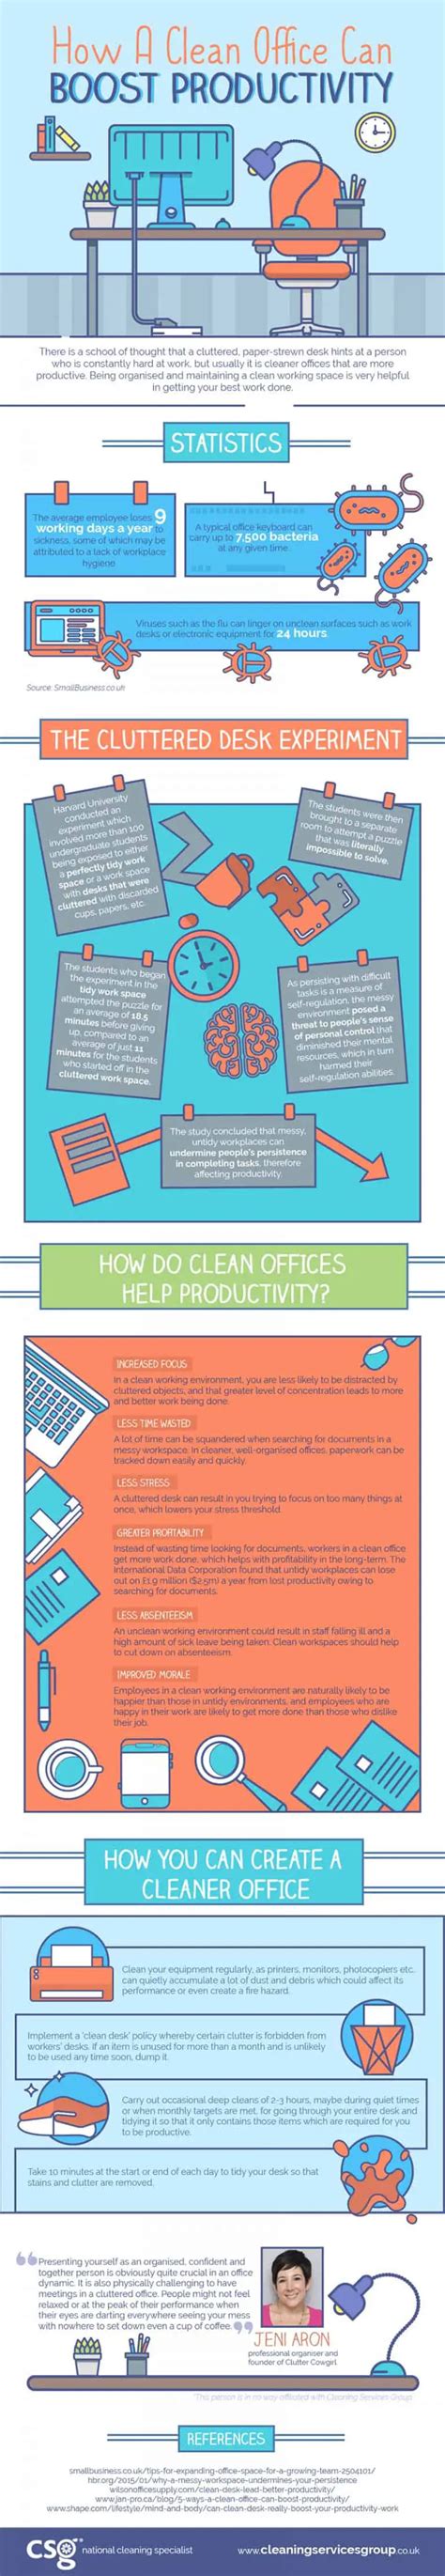 How A Clean Office Can Boost Productivity Infographic Business